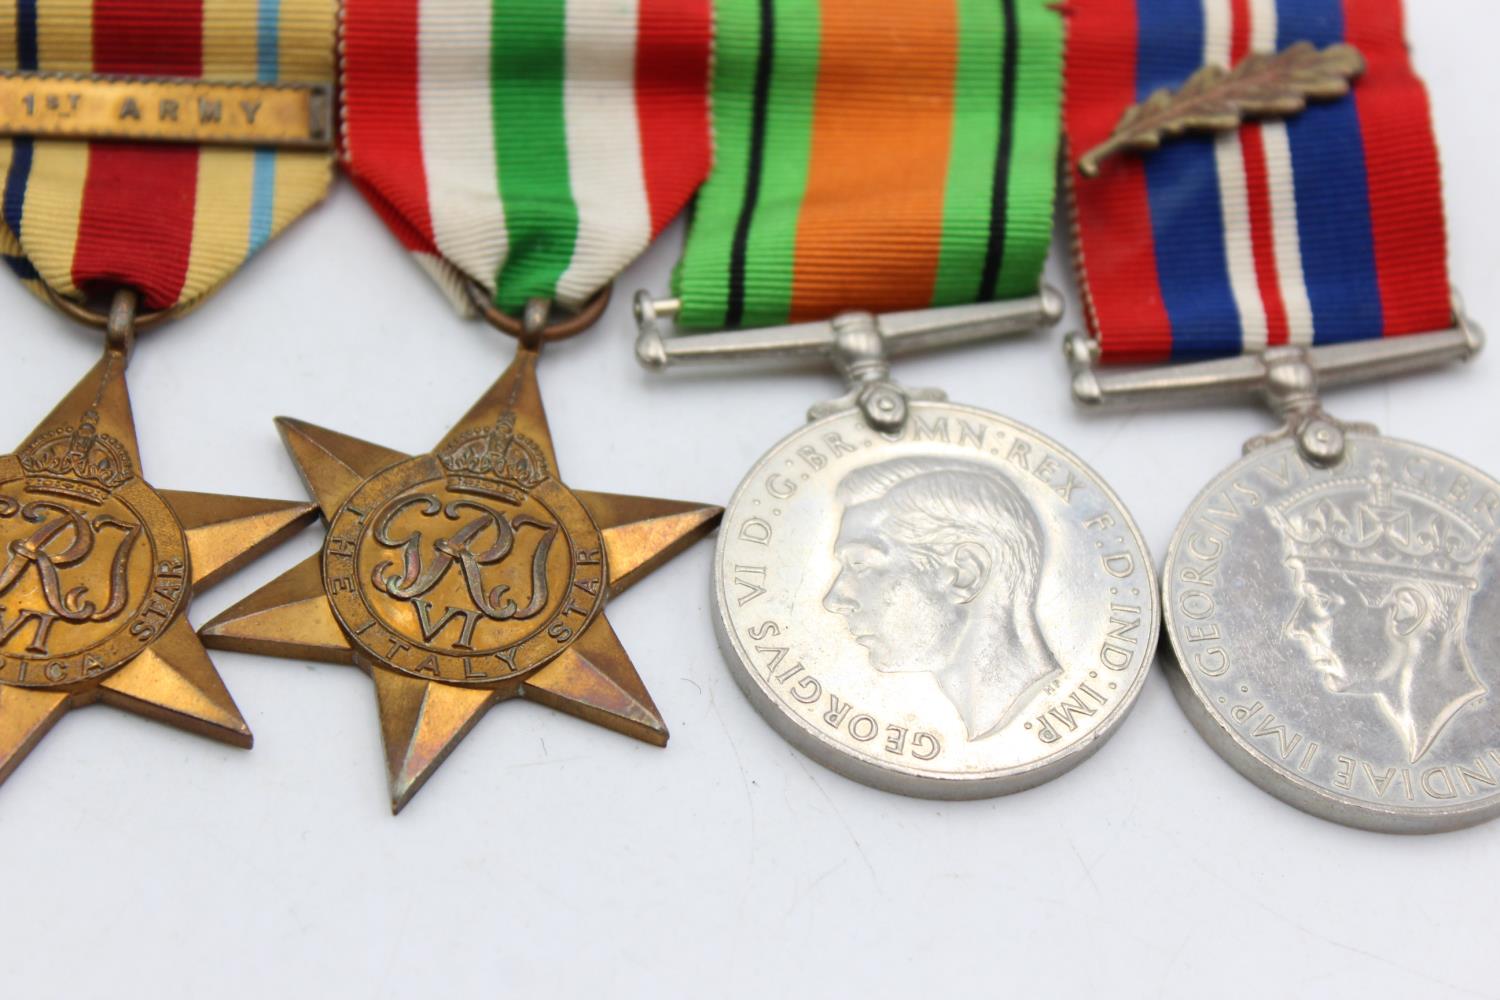 WW2 Mounted Medal Group Inc Africa Star, 1st Army Bar, M.I.D Oakleaf Etc In vintage condition - Image 3 of 5